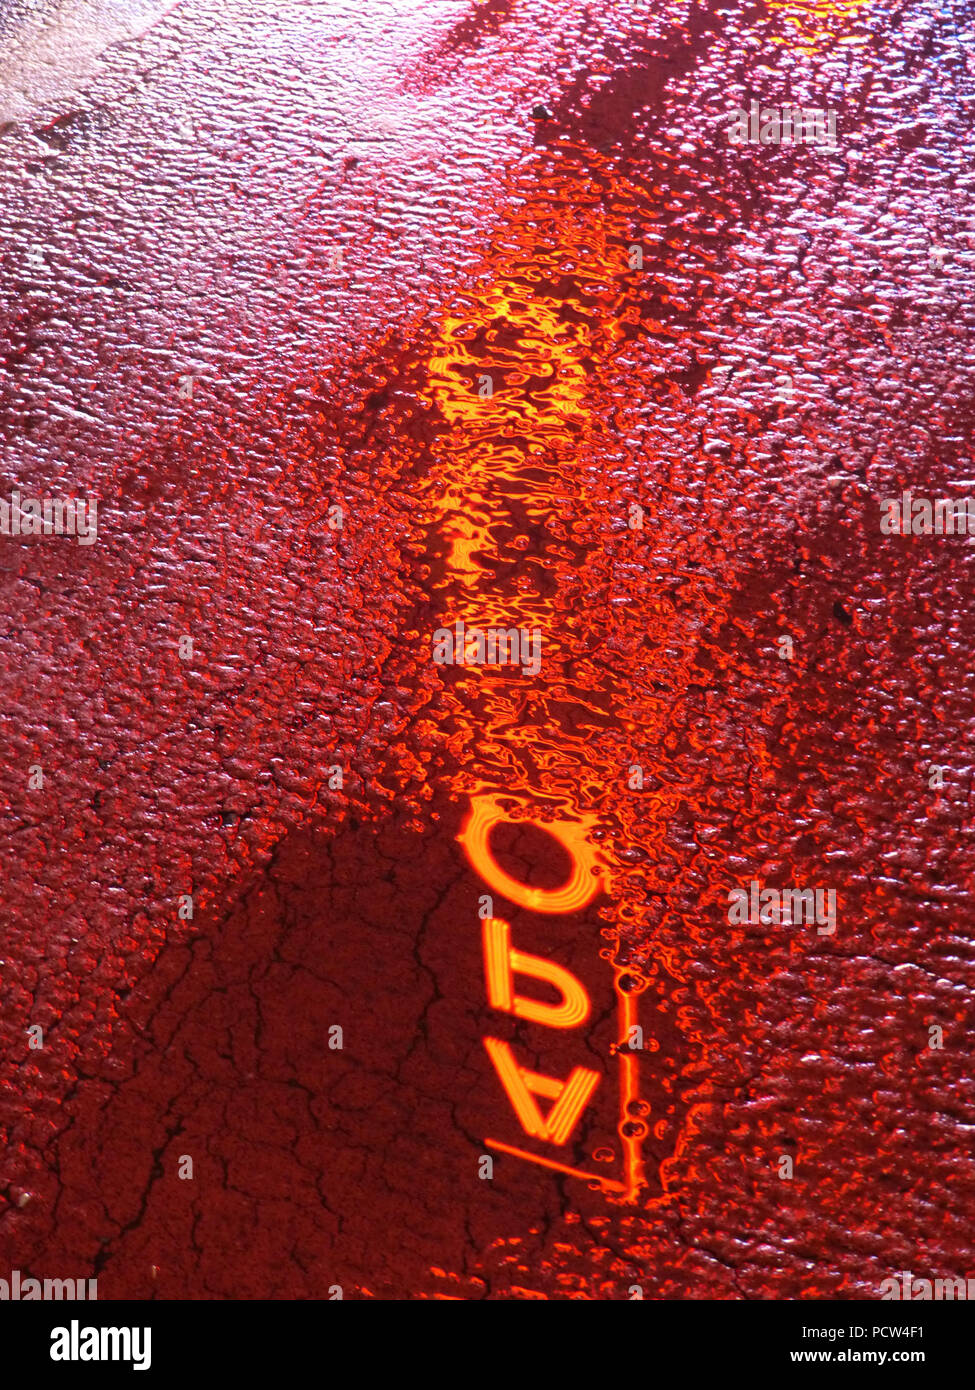 Water reflection in a puddle, Apollo Theater neon sign Stock Photo